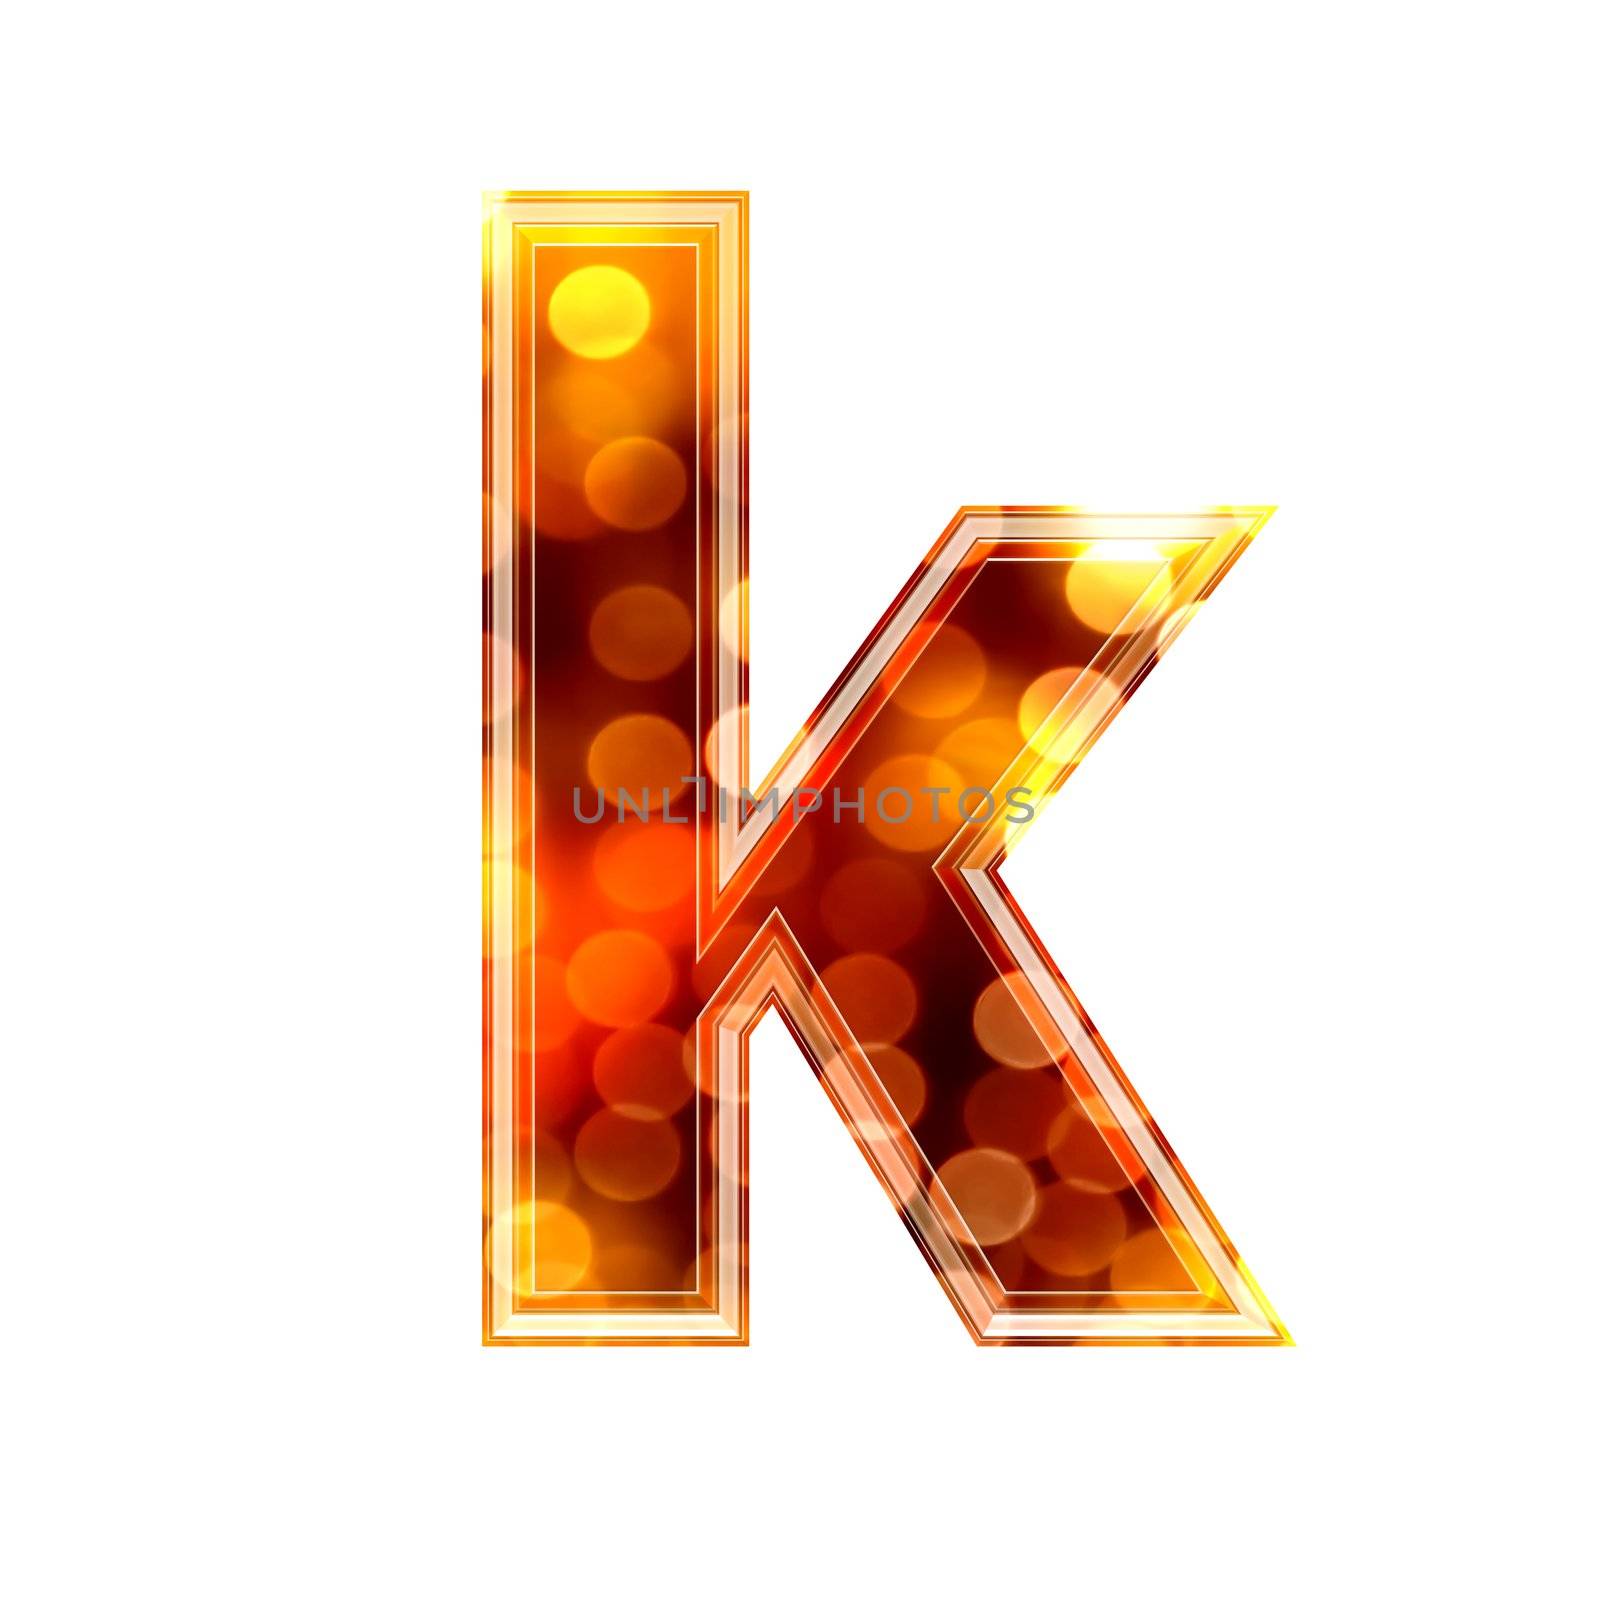 3d letter with glowing lights texture - k